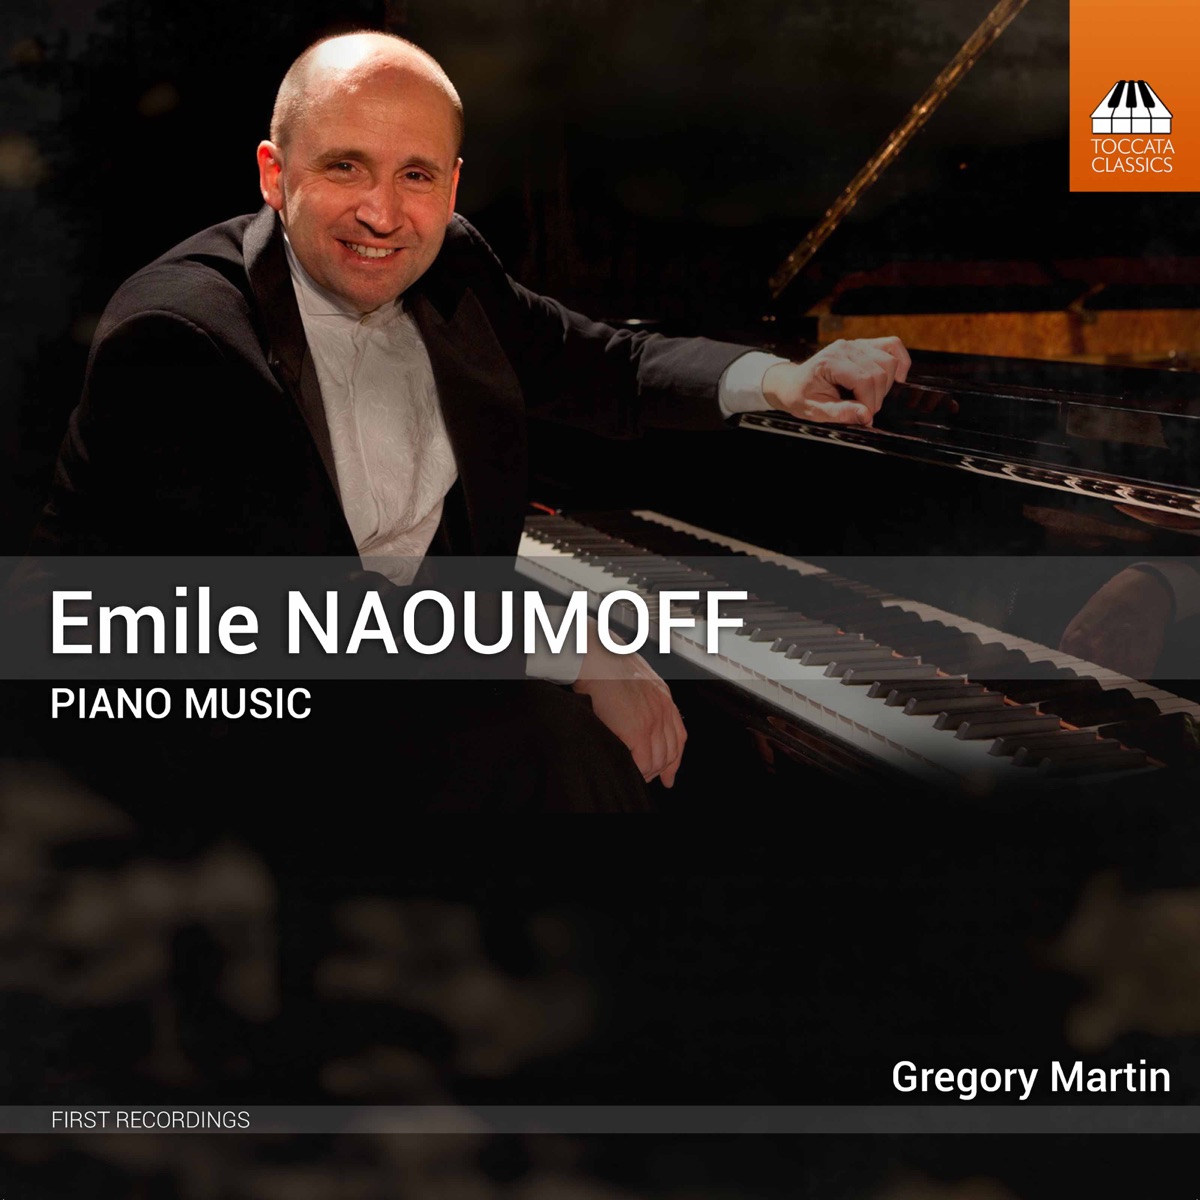 Émile Naoumoff: Complete Piano Music - Album by Gregory Martin - Apple Music